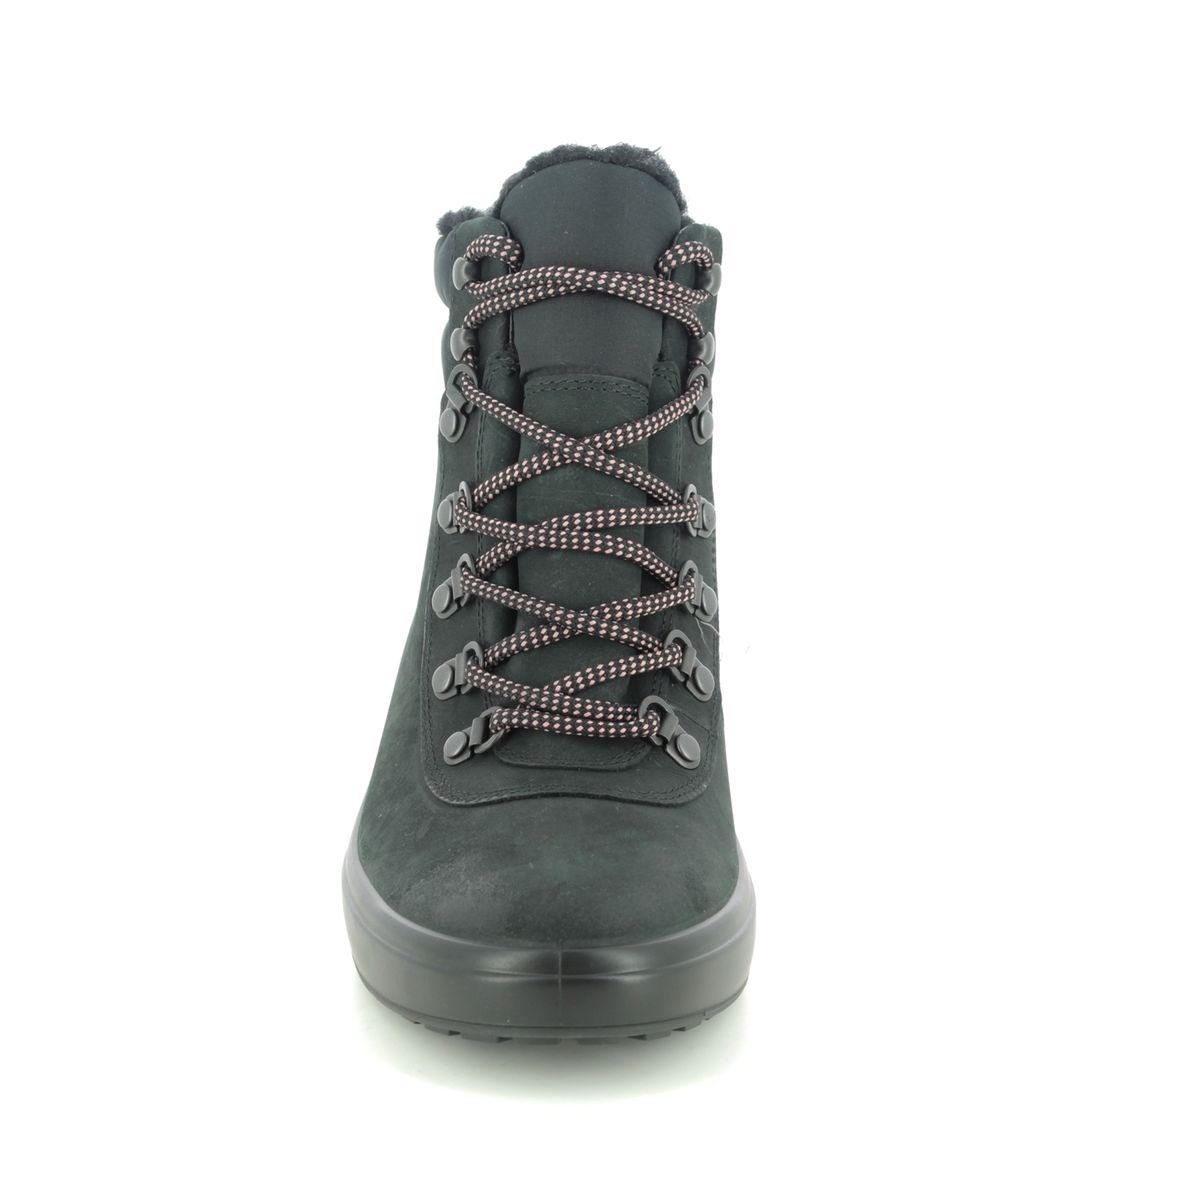 ECCO Soft 7 Wedge Black Womens Lace Up Boots